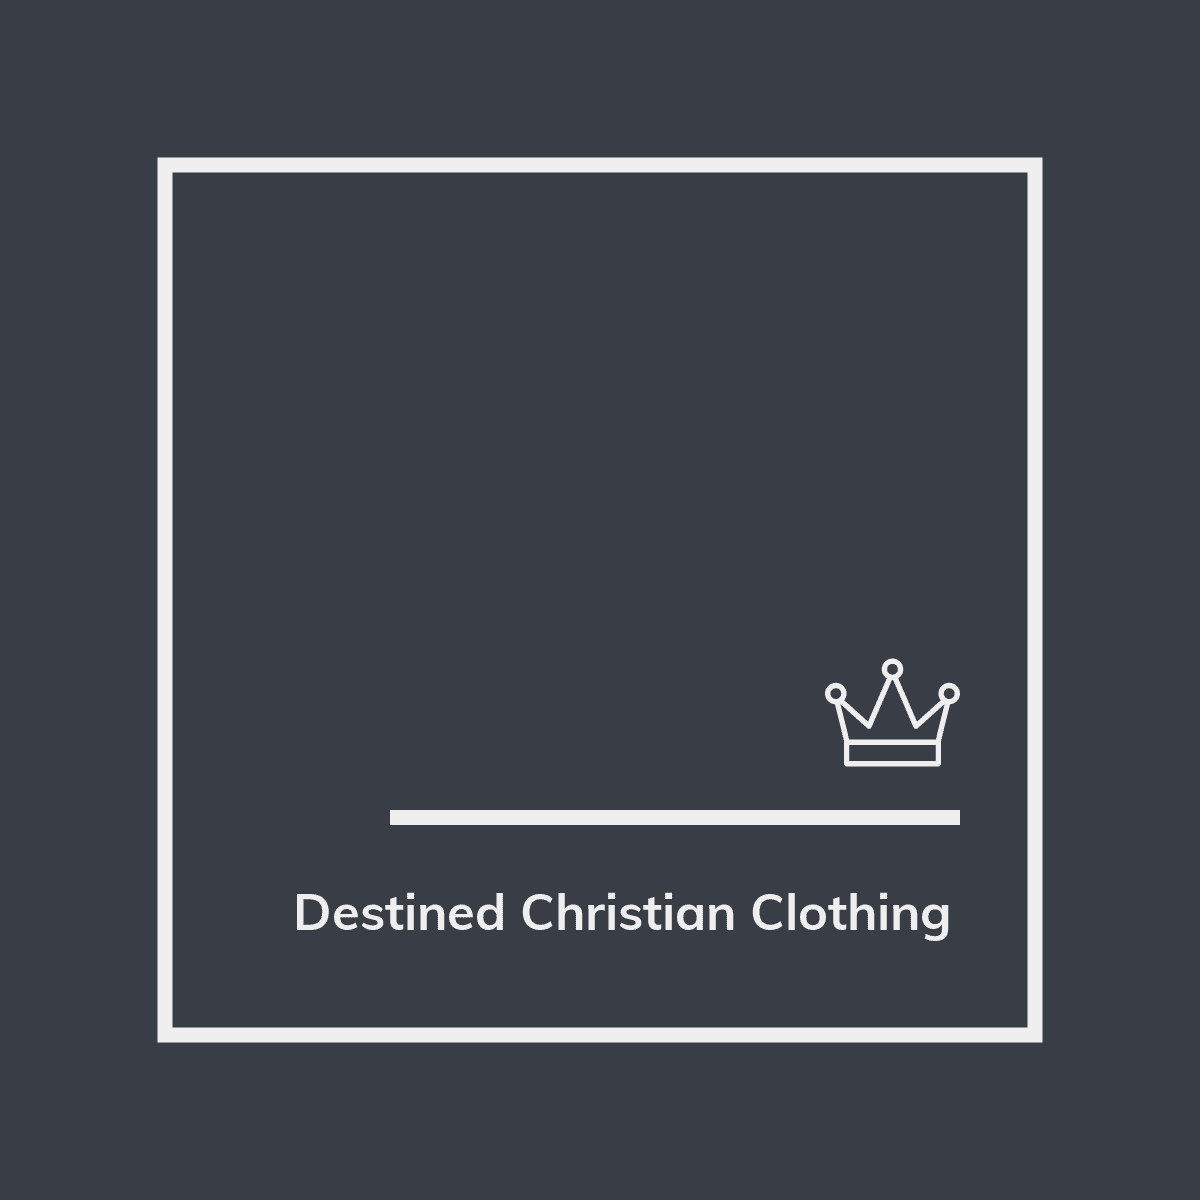 Destined Christian Clothing